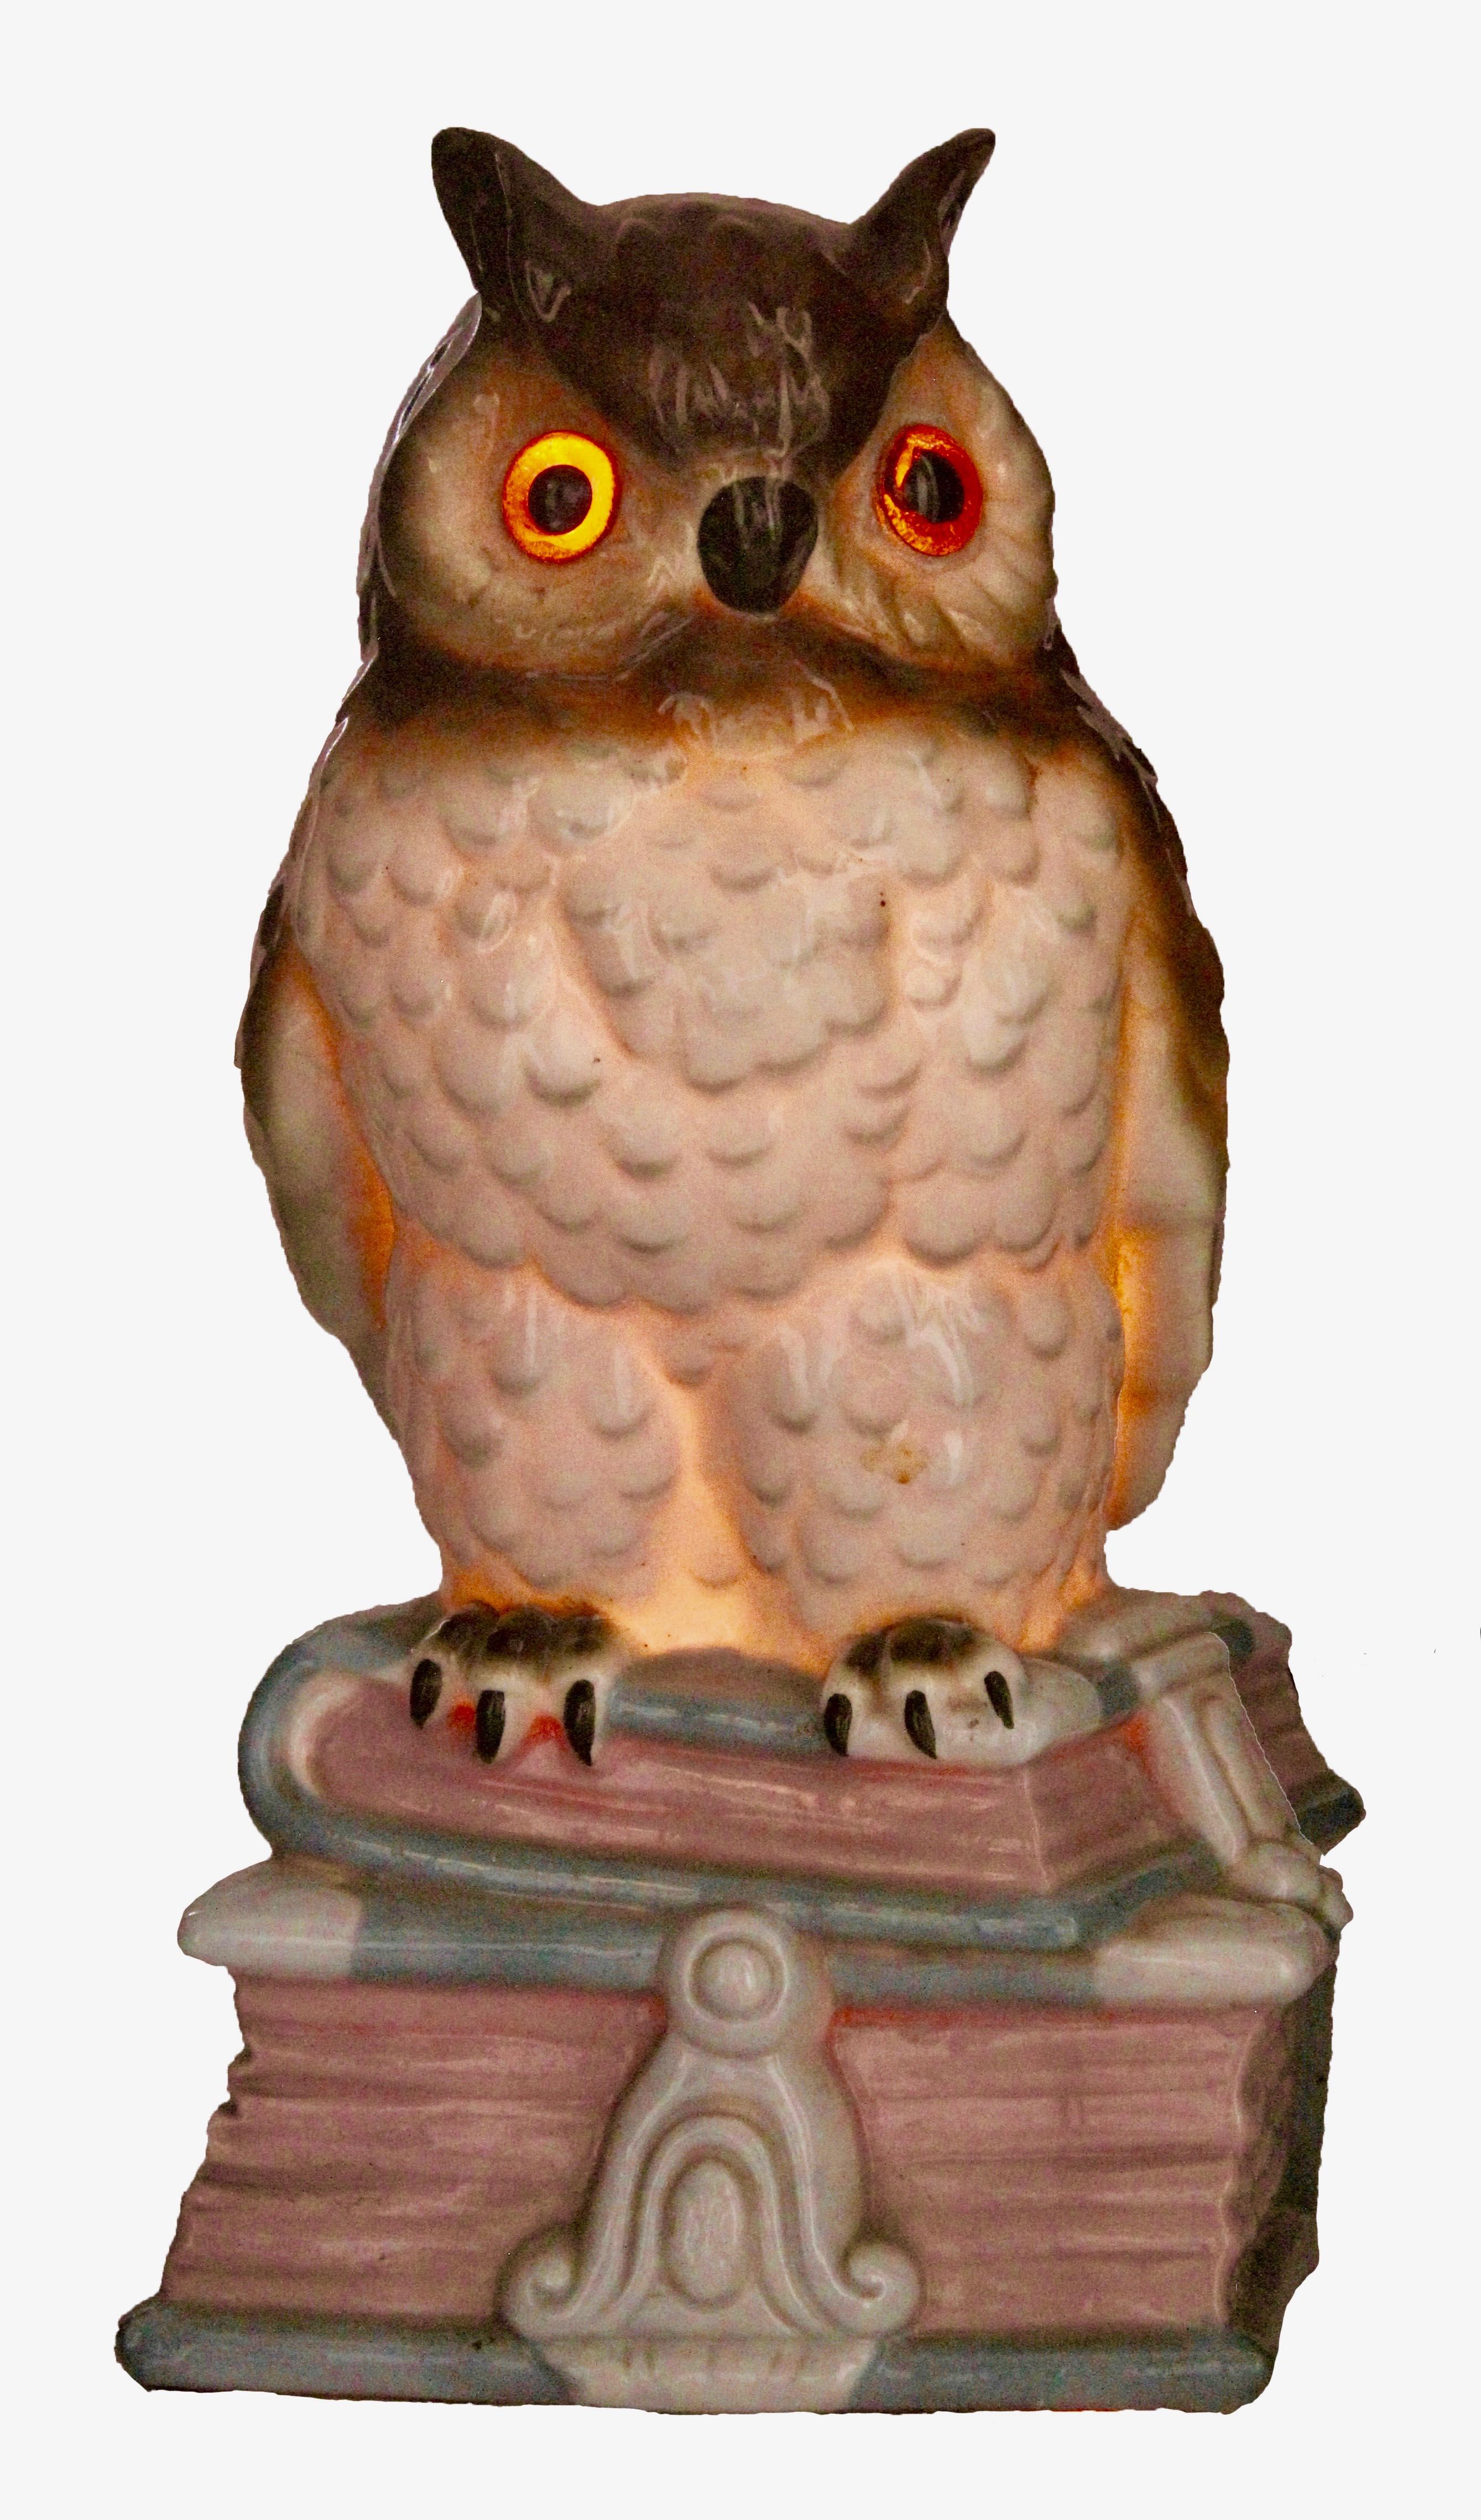 Germany, 1930s, excellent condition
Porcelain figurine/air purifier/table lamp. Owl eagle owl. Undamaged original condition. The lighting works. A small container on the back can be filled with fragrance oil. The oil evaporates due to the heat of